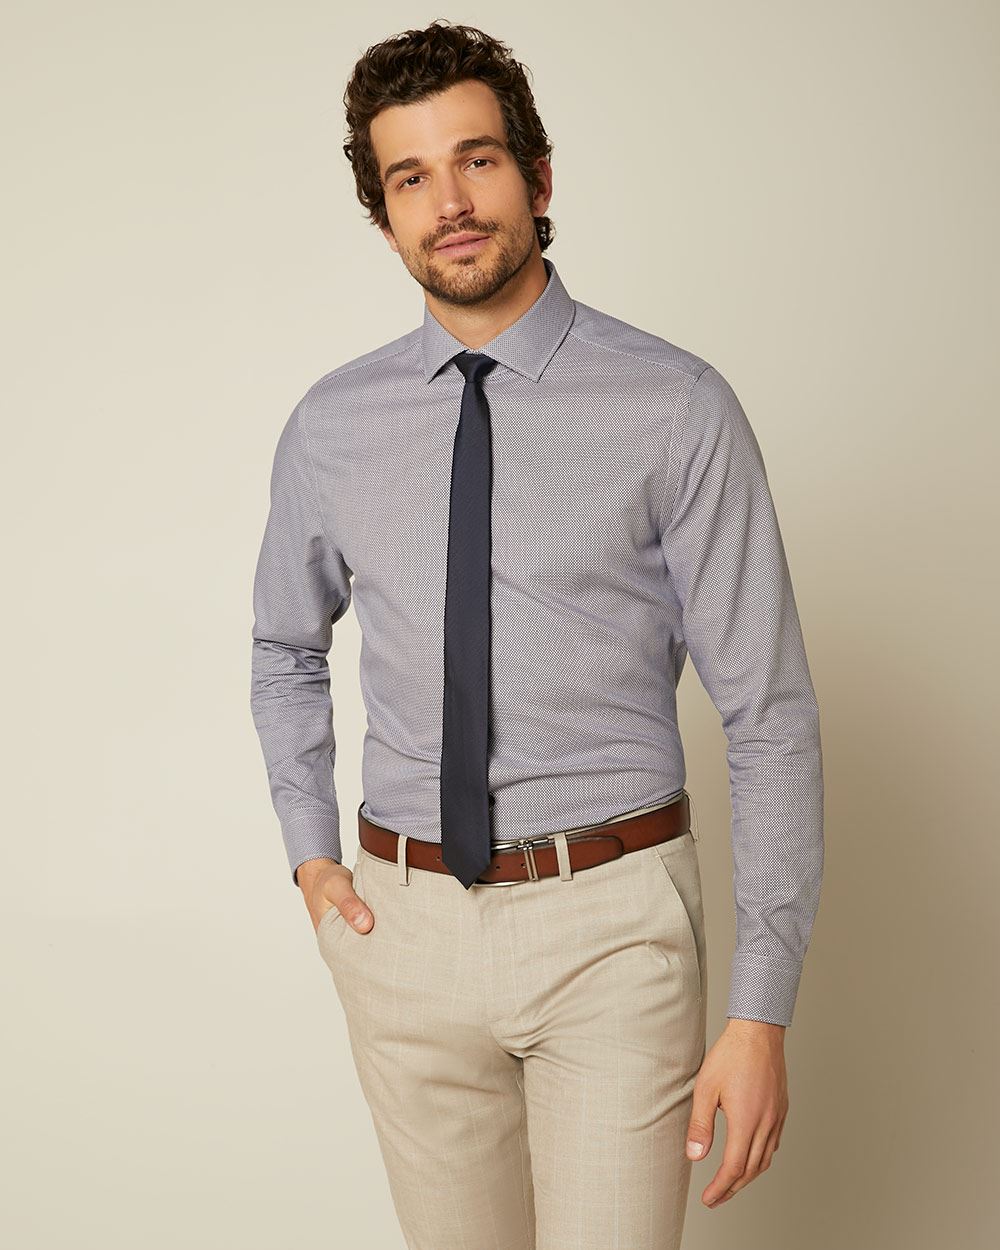 Tailored Fit Textured Dress Shirt | RW&CO.